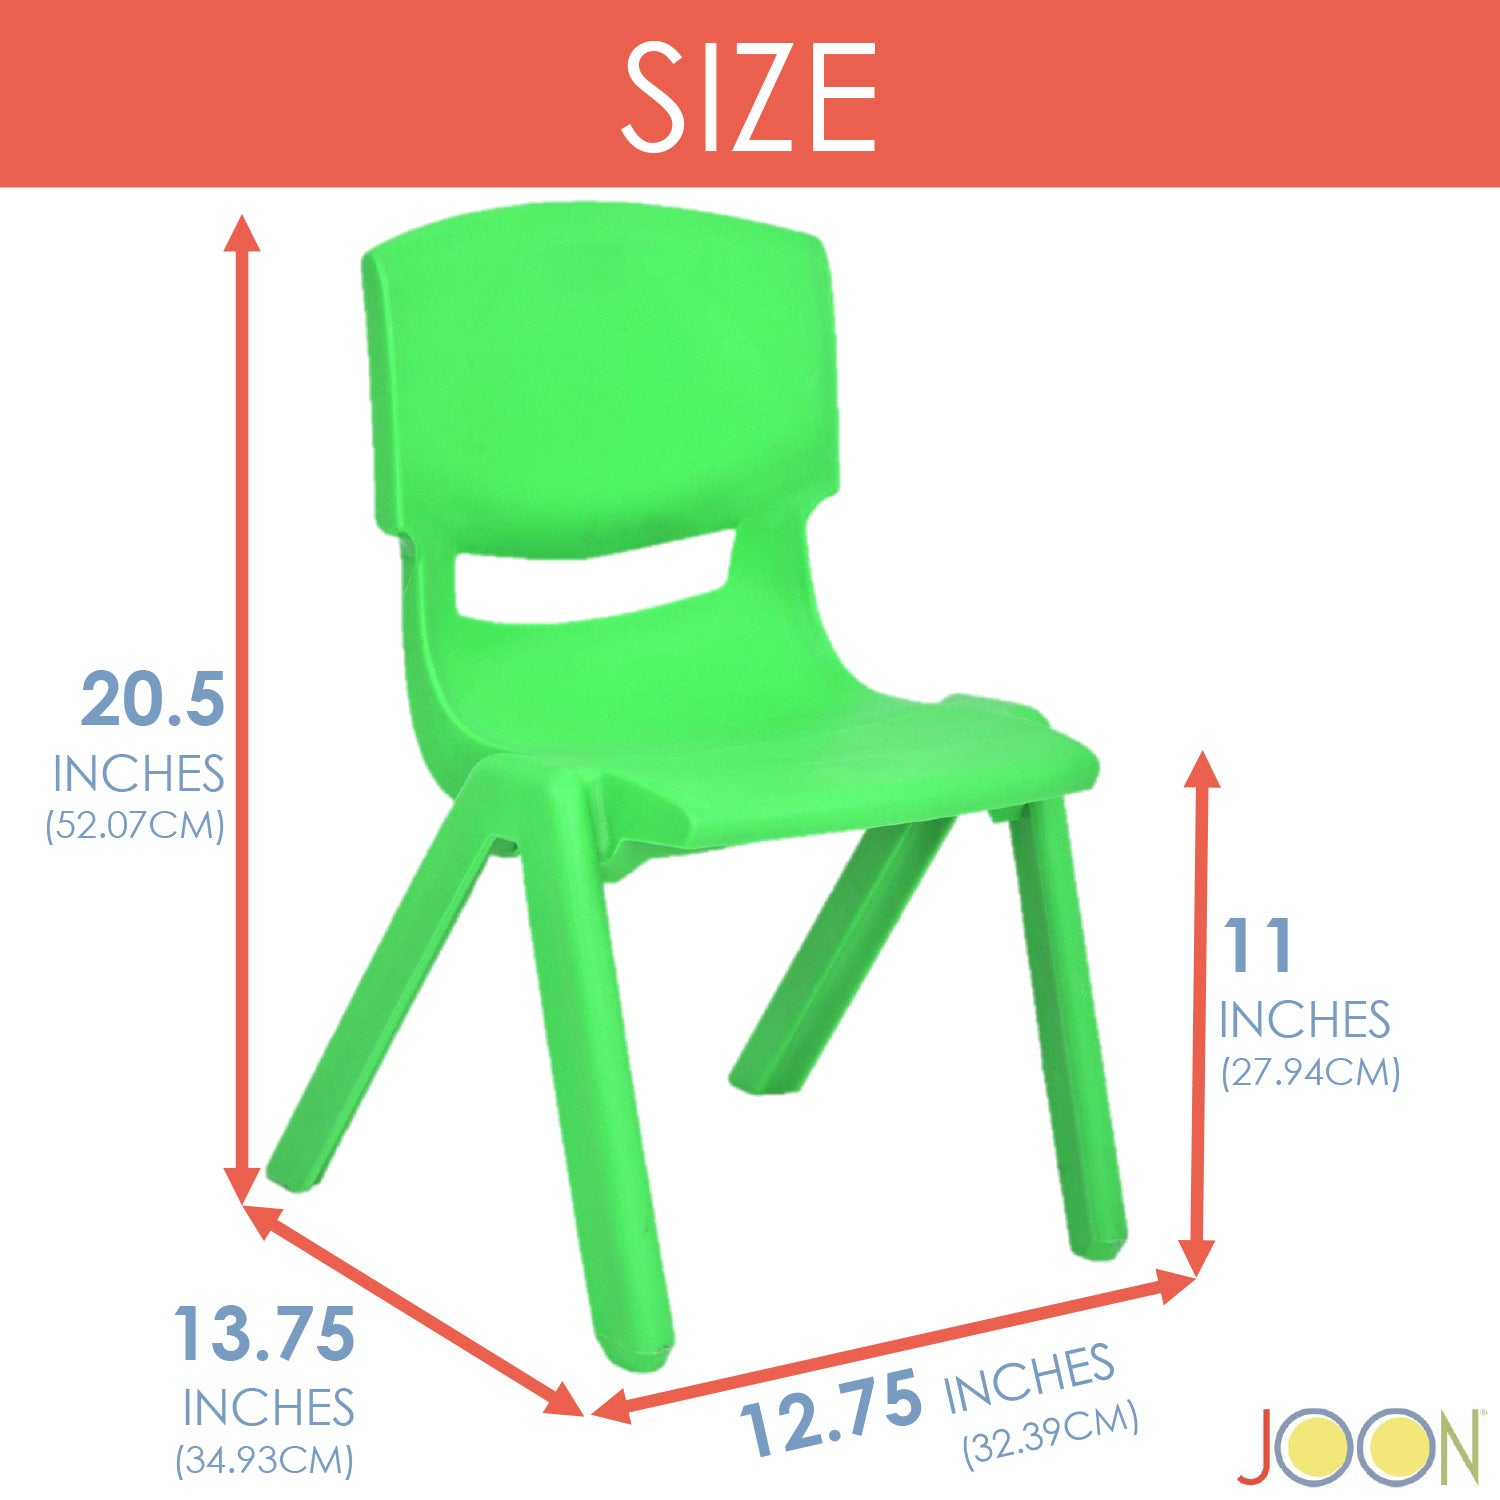 JOON Stackable Plastic Kids Learning Chairs, Green, 20.5x12.75X11 Inches, 2-Pack (Pack of 2)